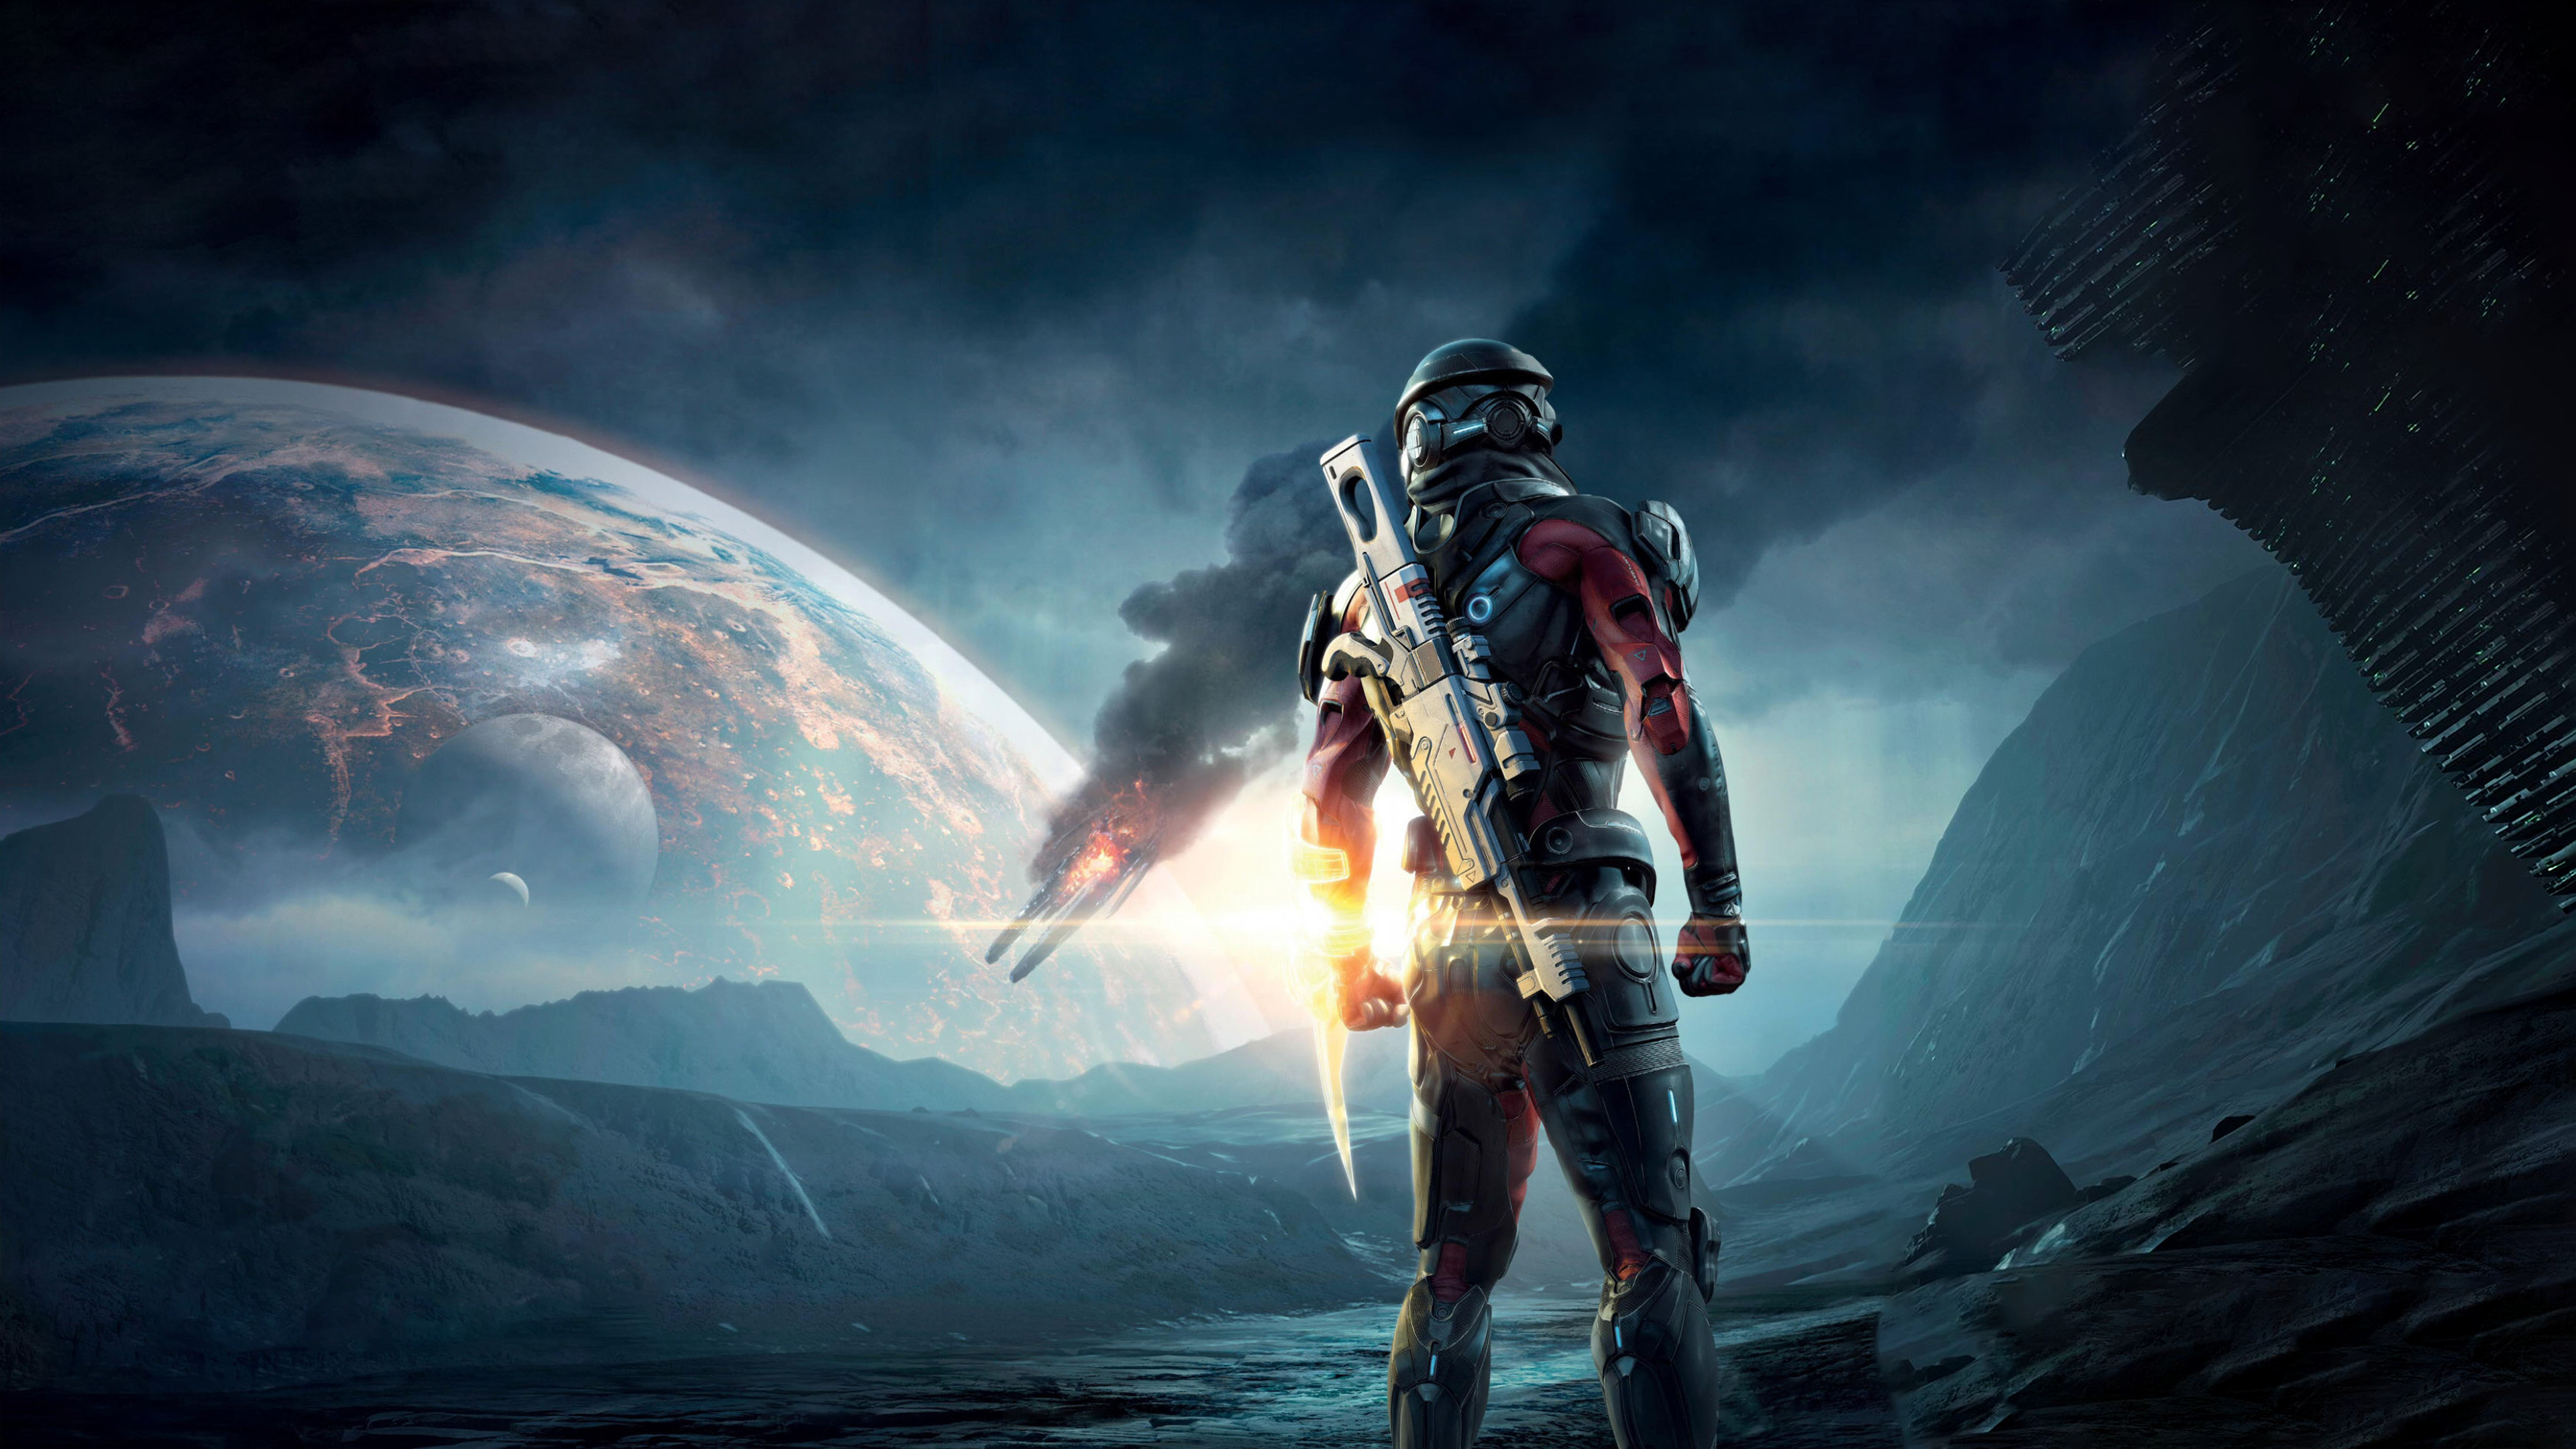 3840x2160 98 Mass Effect: Andromeda HD Wallpapers | Backgrounds - Wallpaper Abyss